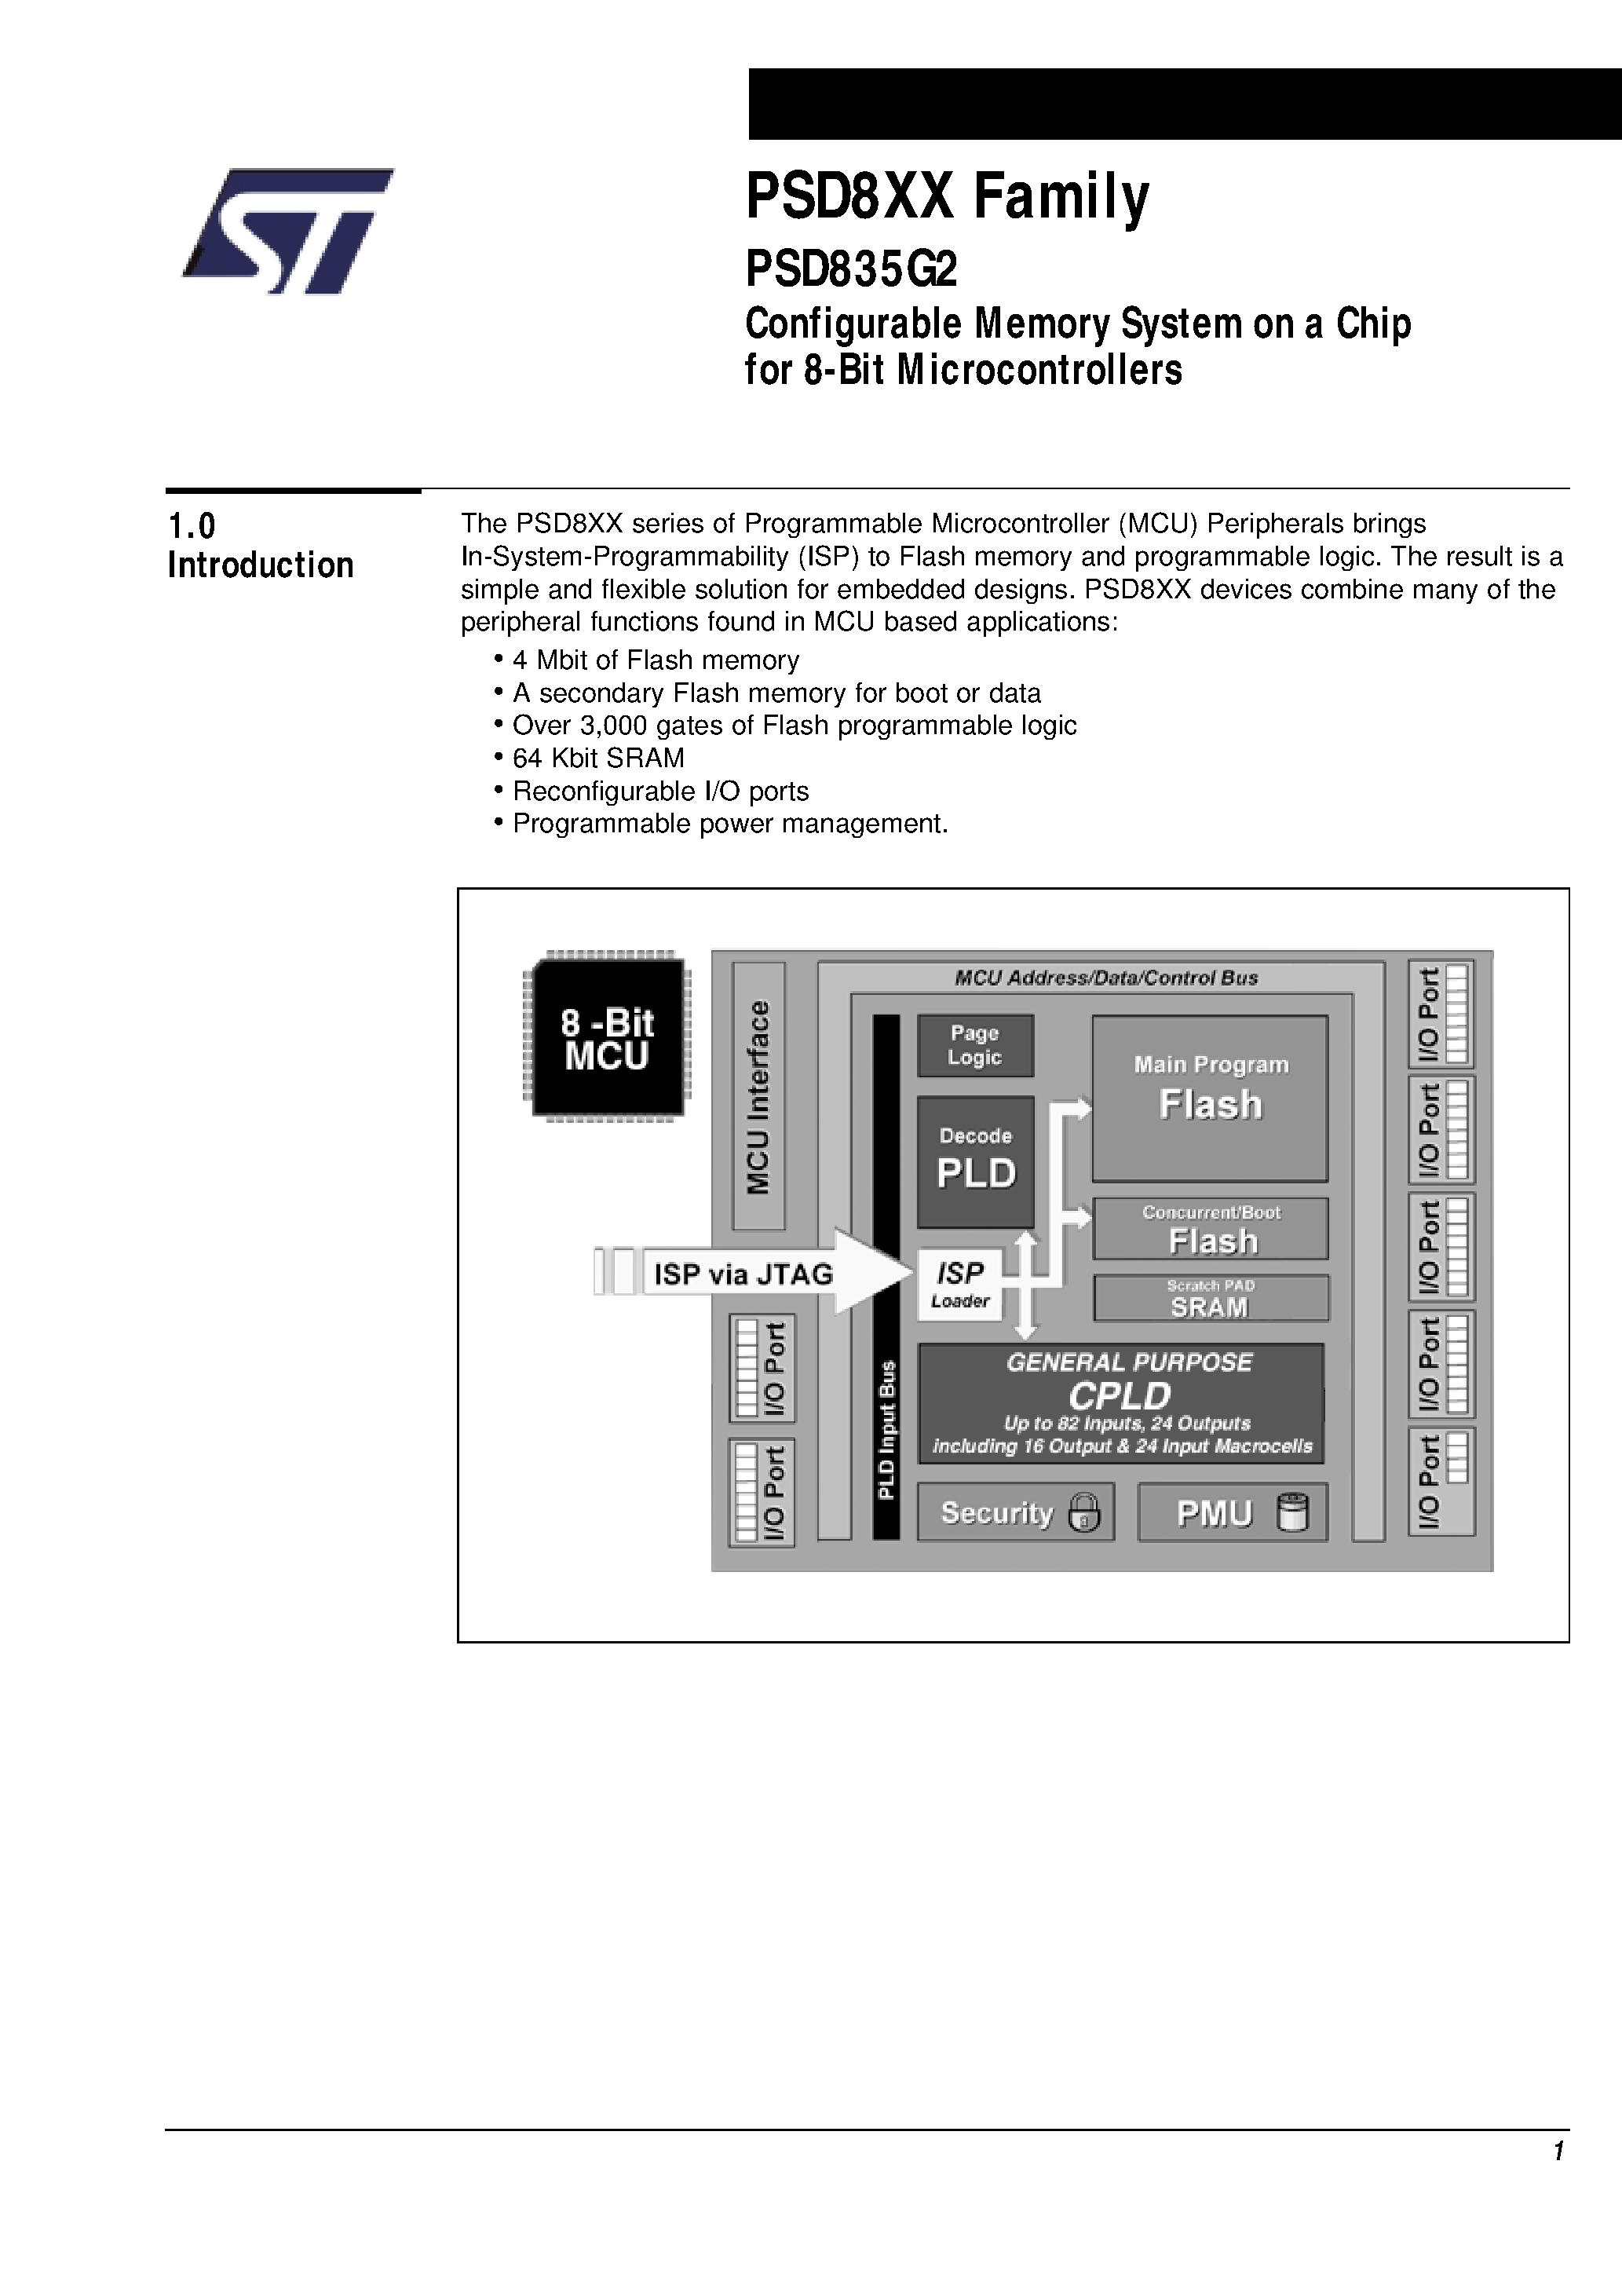 Datasheet PSD835F1V-A-20U - Configurable Memory System on a Chip for 8-Bit Microcontrollers page 2